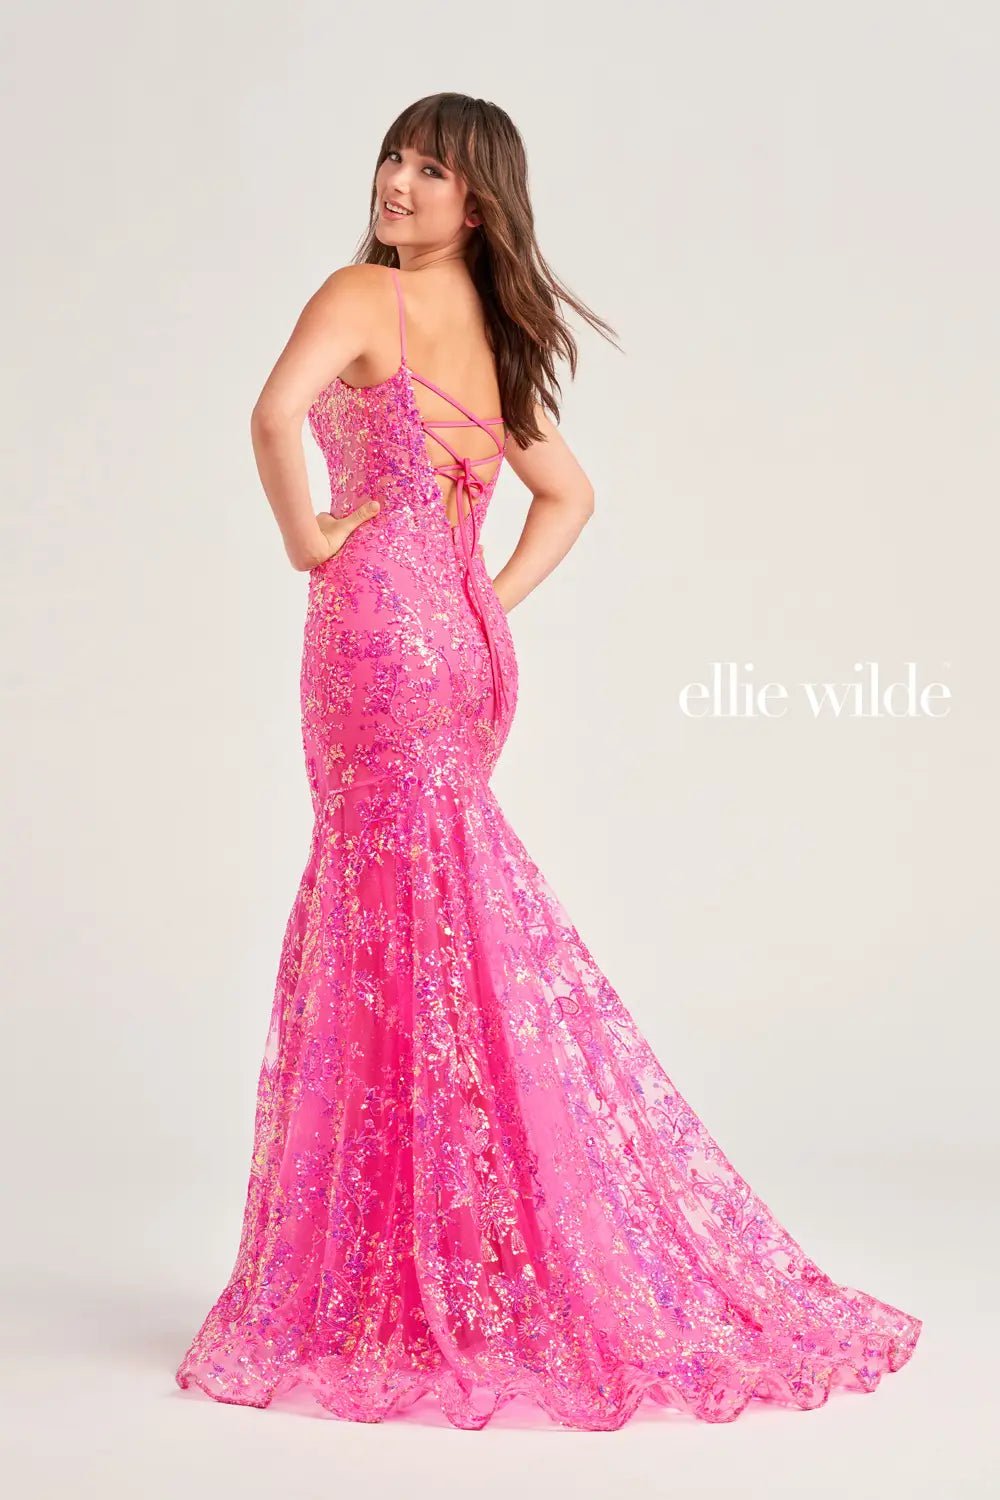 Show off your figure when you wear this body con fitted silhouette by Ellie Wilde style EW35013. This mesmerizing dress features a lovely v neckline with simple straps and eye catching lace up open back. Stunning embroidery and soft glitter tulle covers this number from top to bottom ensuring all heads turn towards you.